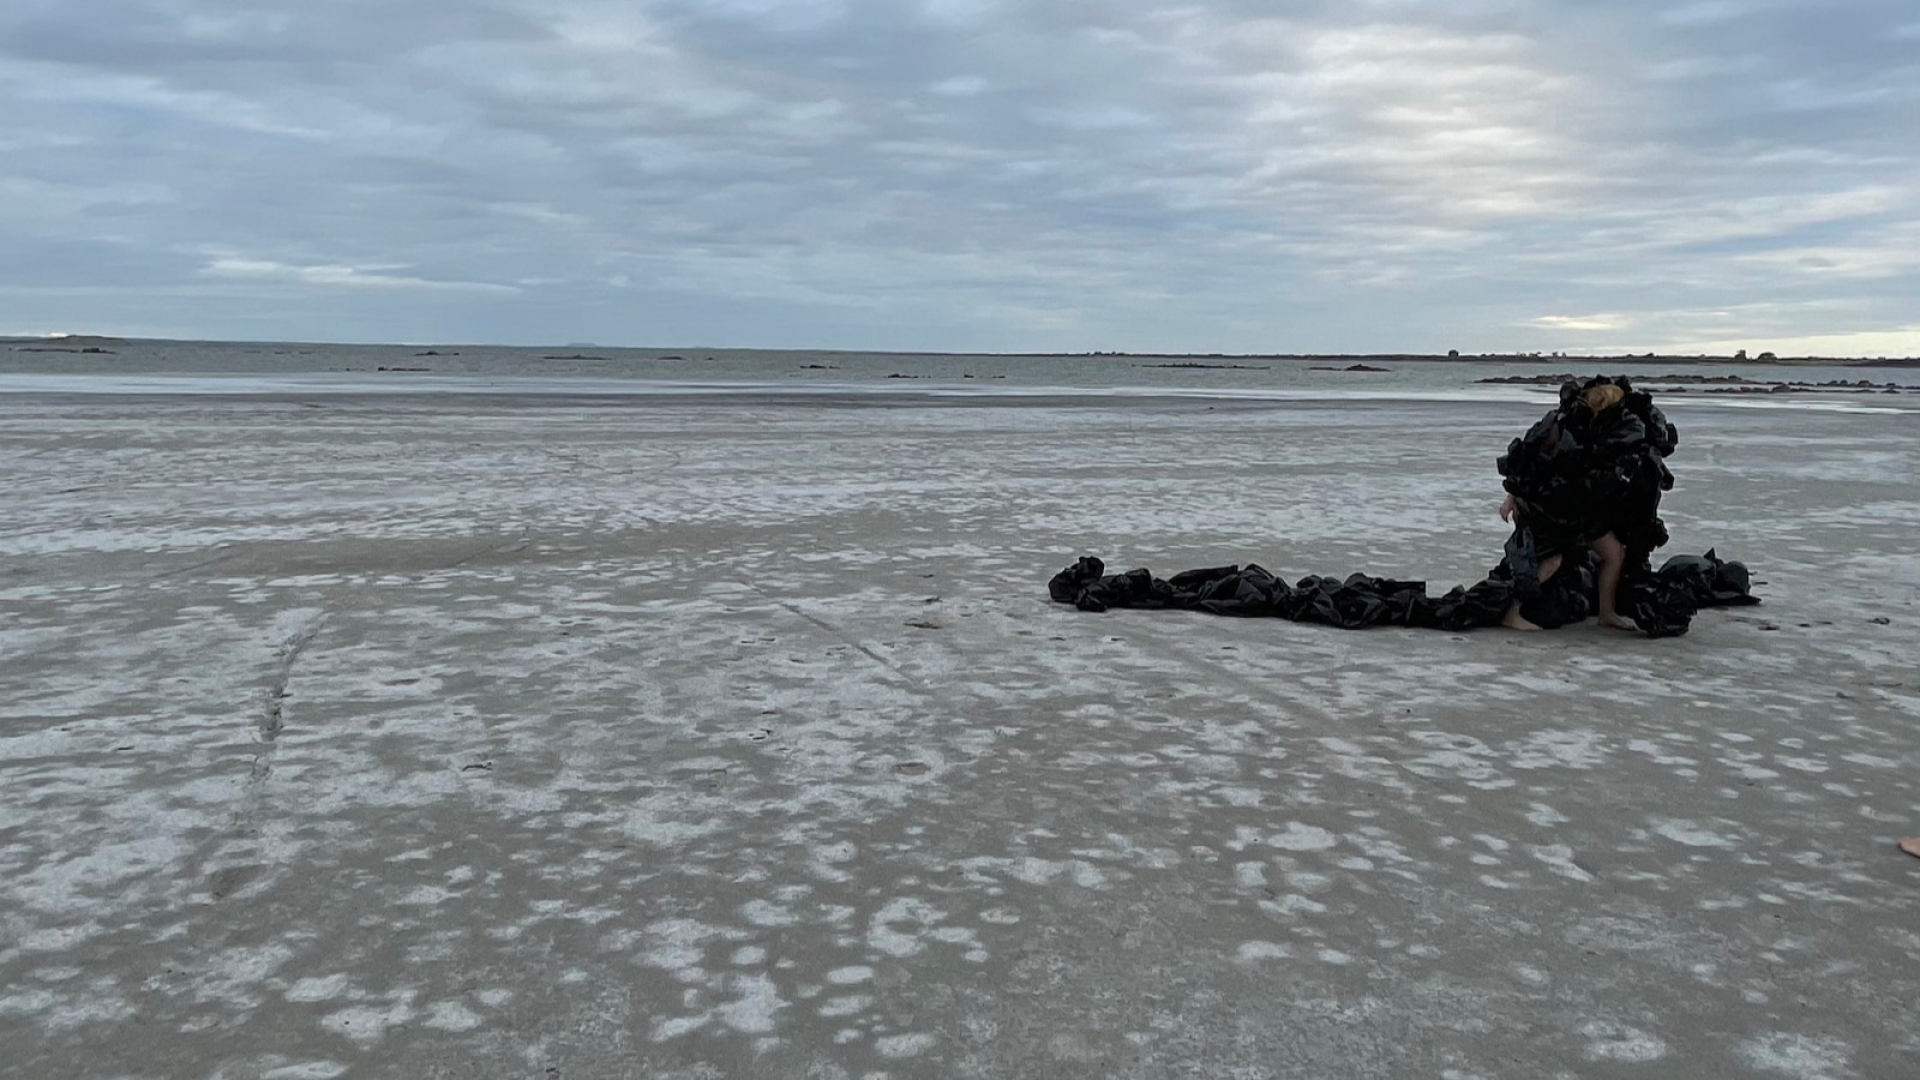 Image of performance artist and black scupture on dry salt bed lake